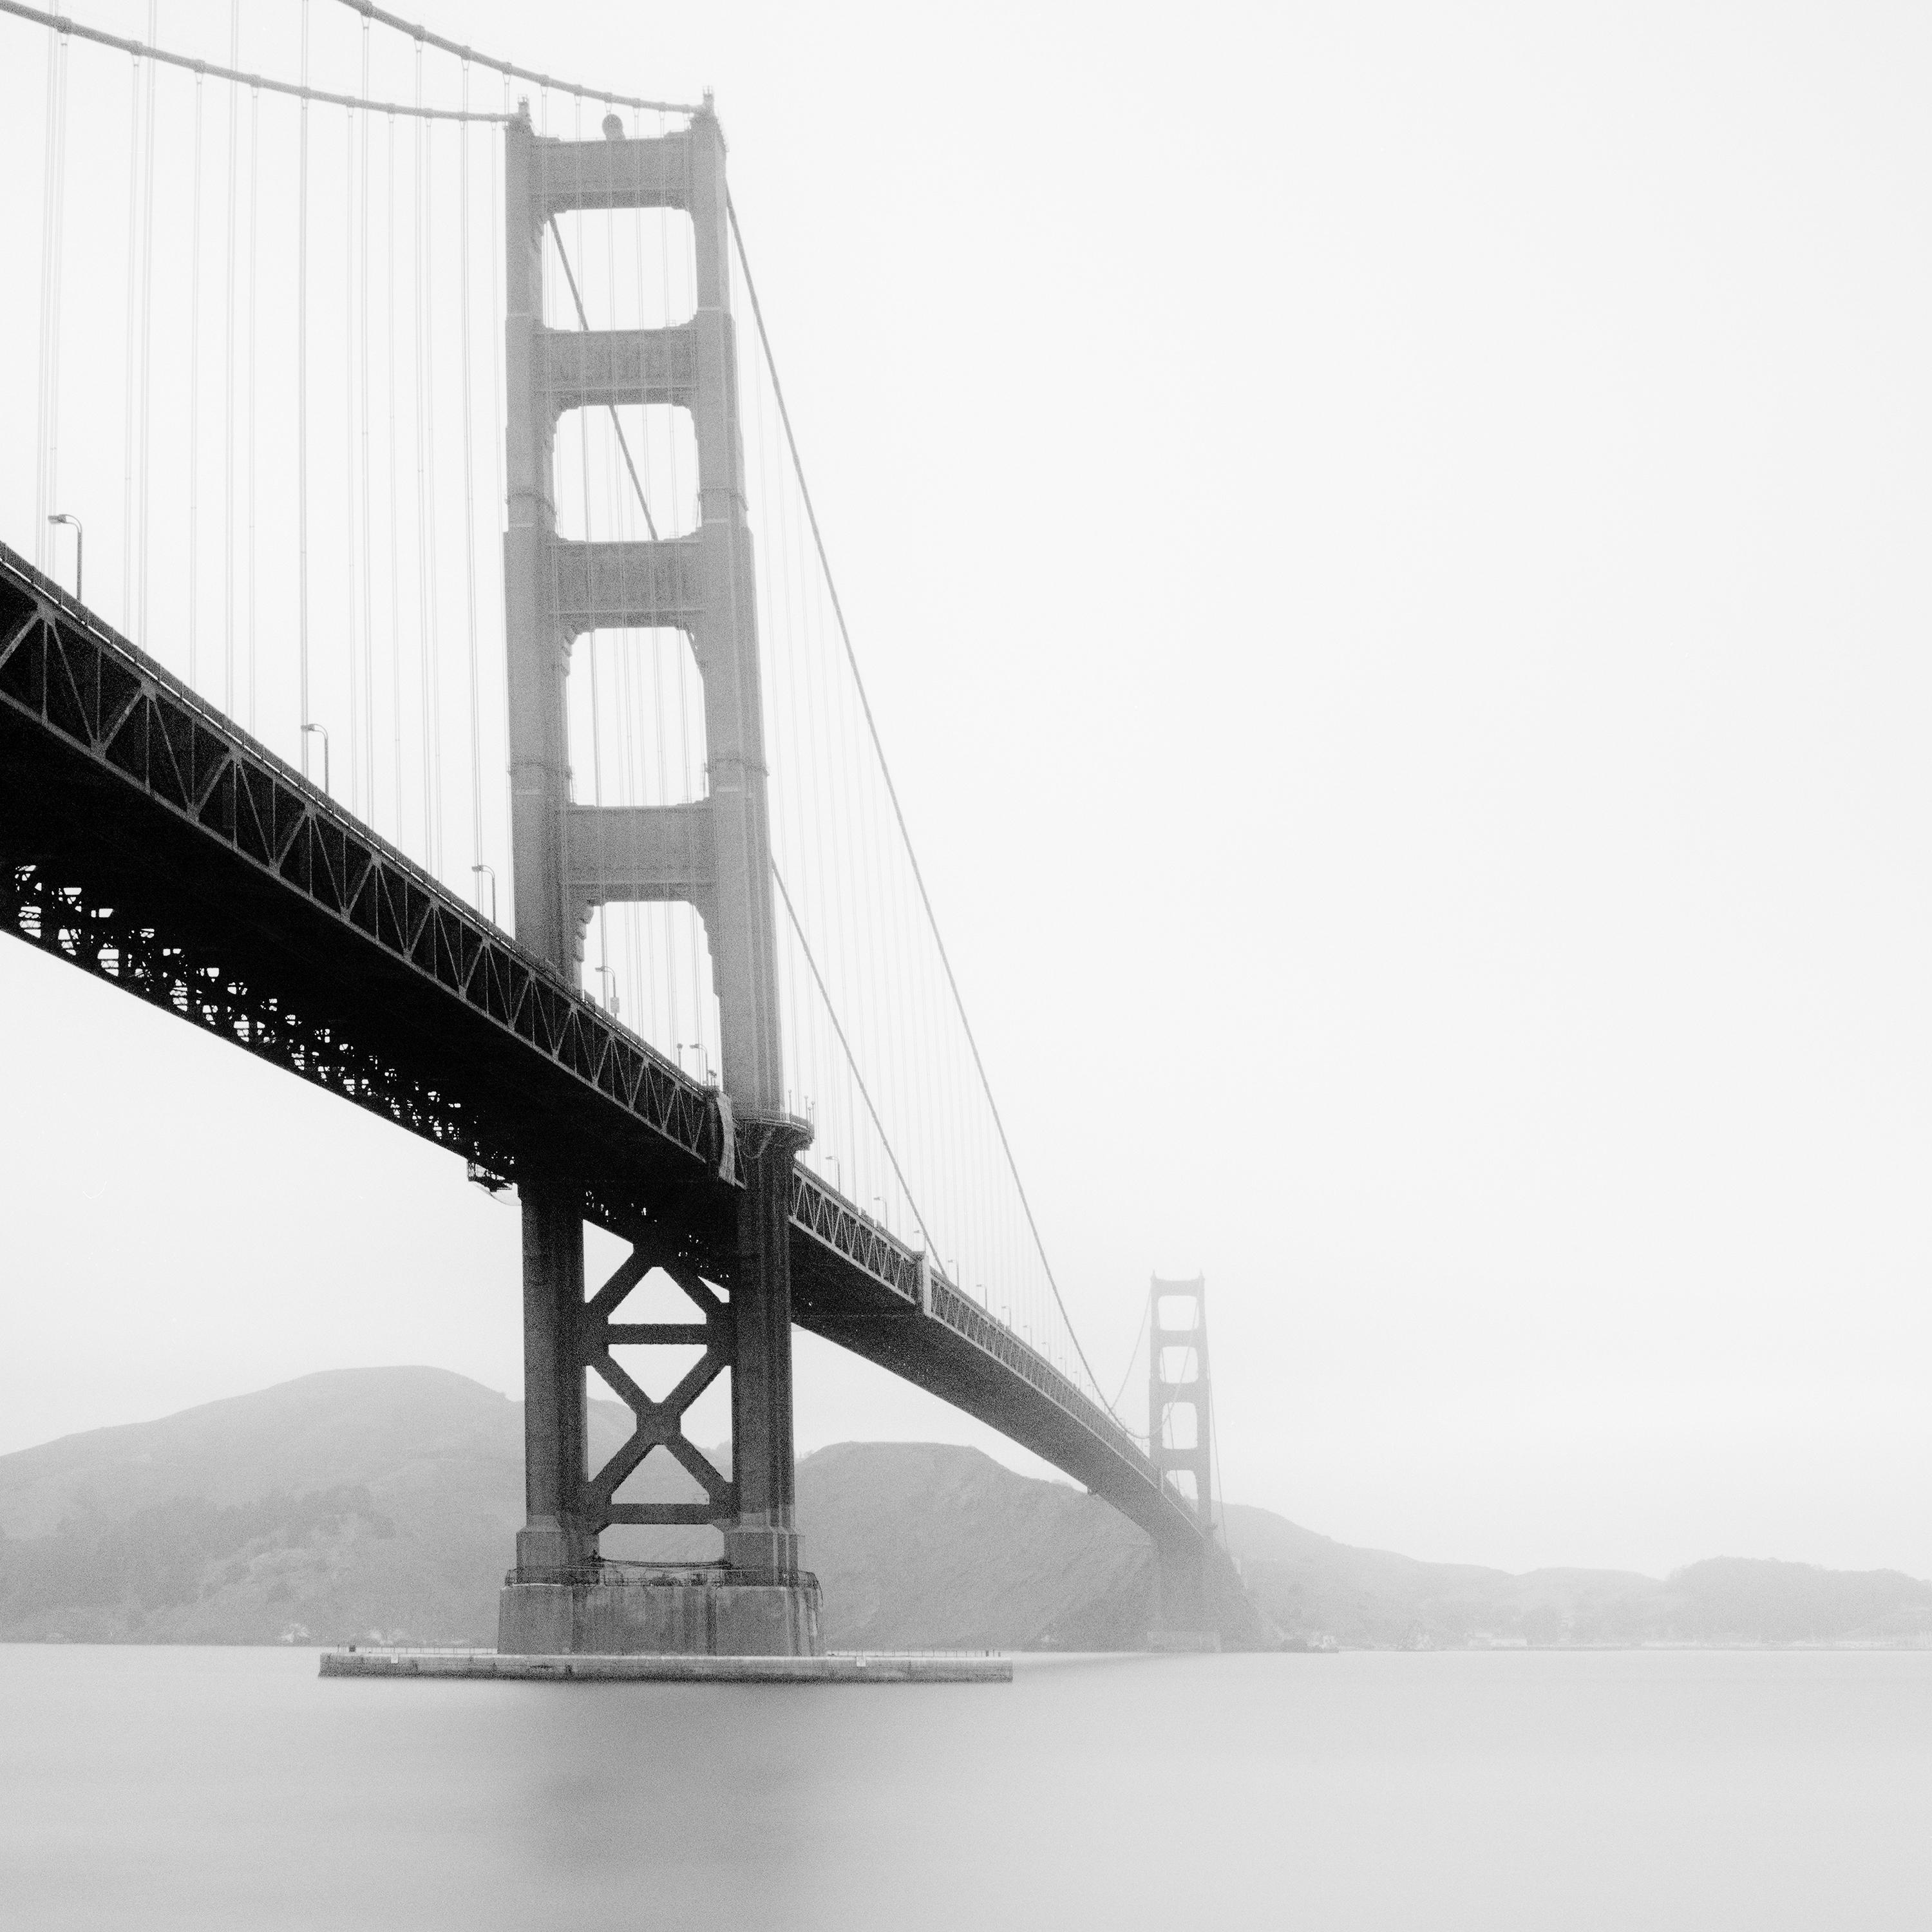 Black and White Fine Art minimalist photography - Golden Gate Bridge in foggy weather, San Francisco, California, USA. Archival pigment ink print, edition of 9. Signed, titled, dated and numbered by artist. Certificate of authenticity included.